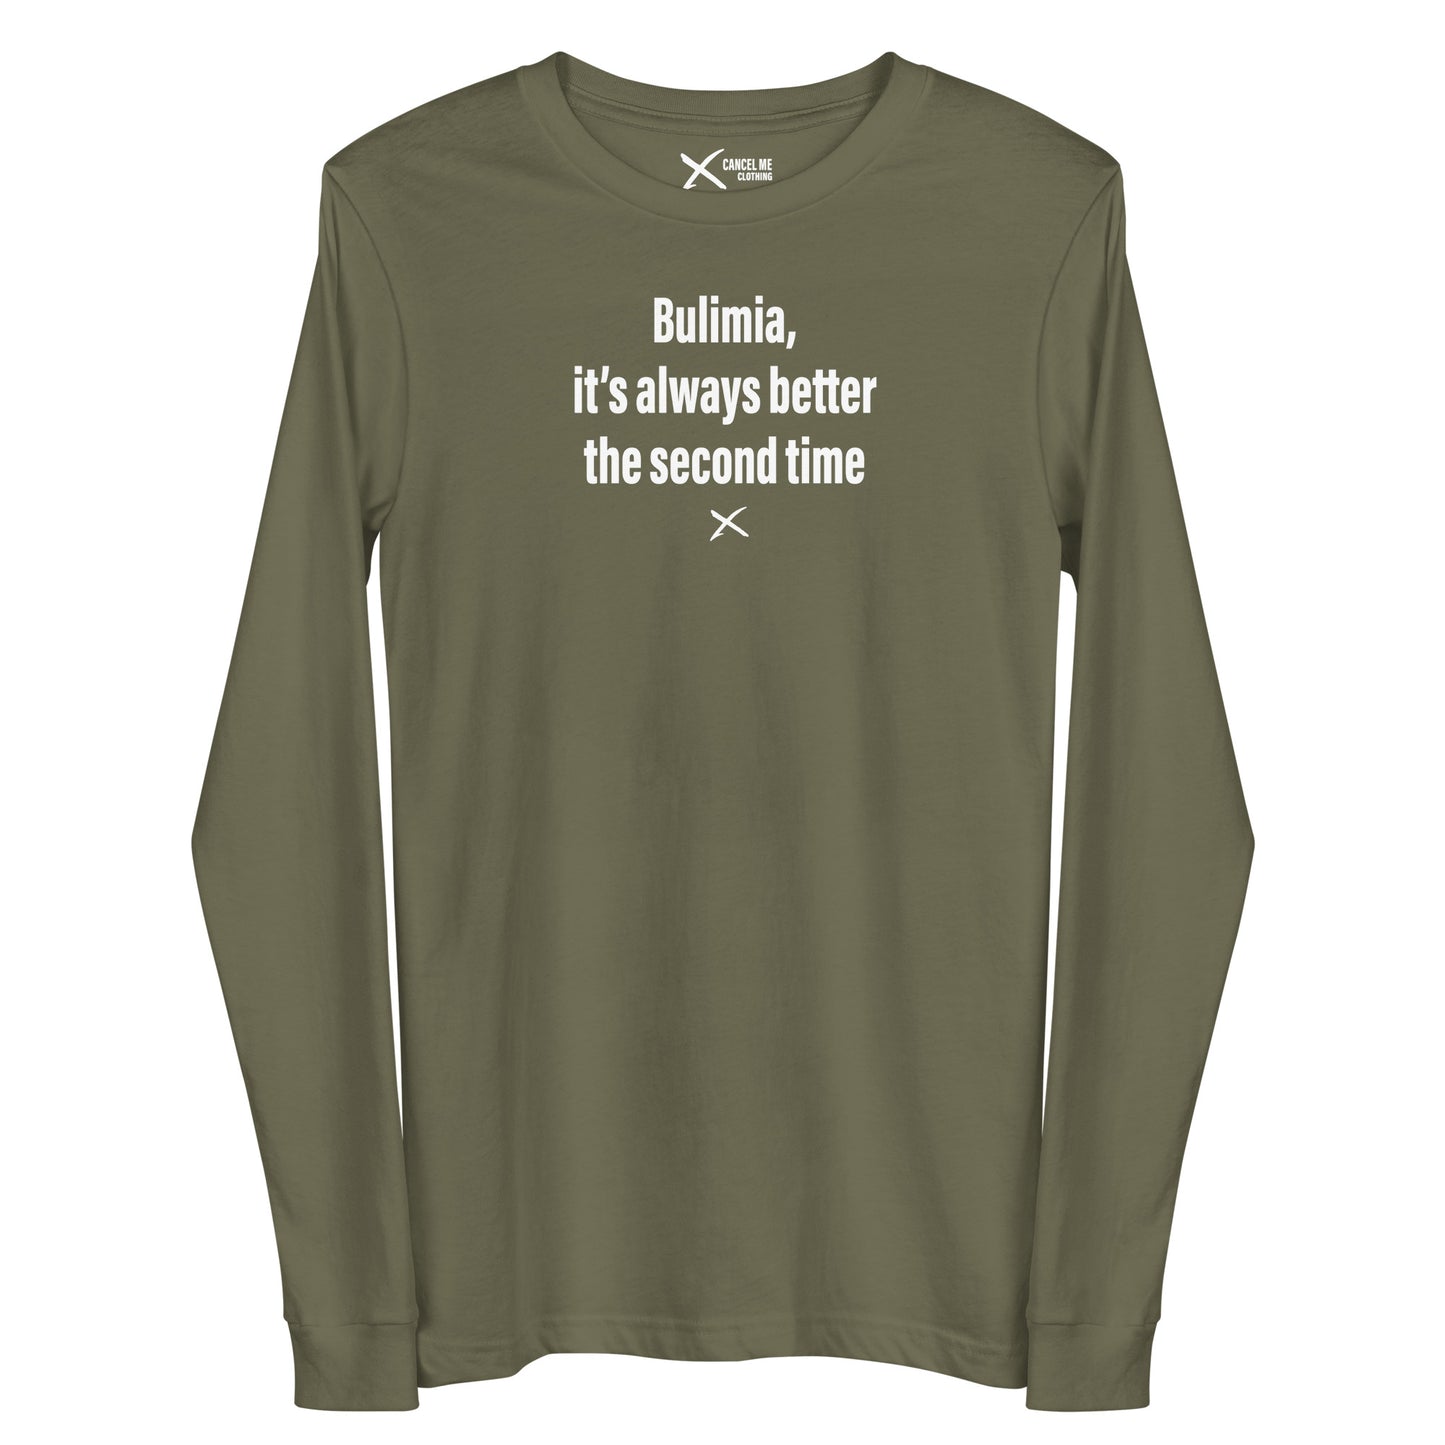 Bulimia, it's always better the second time - Longsleeve